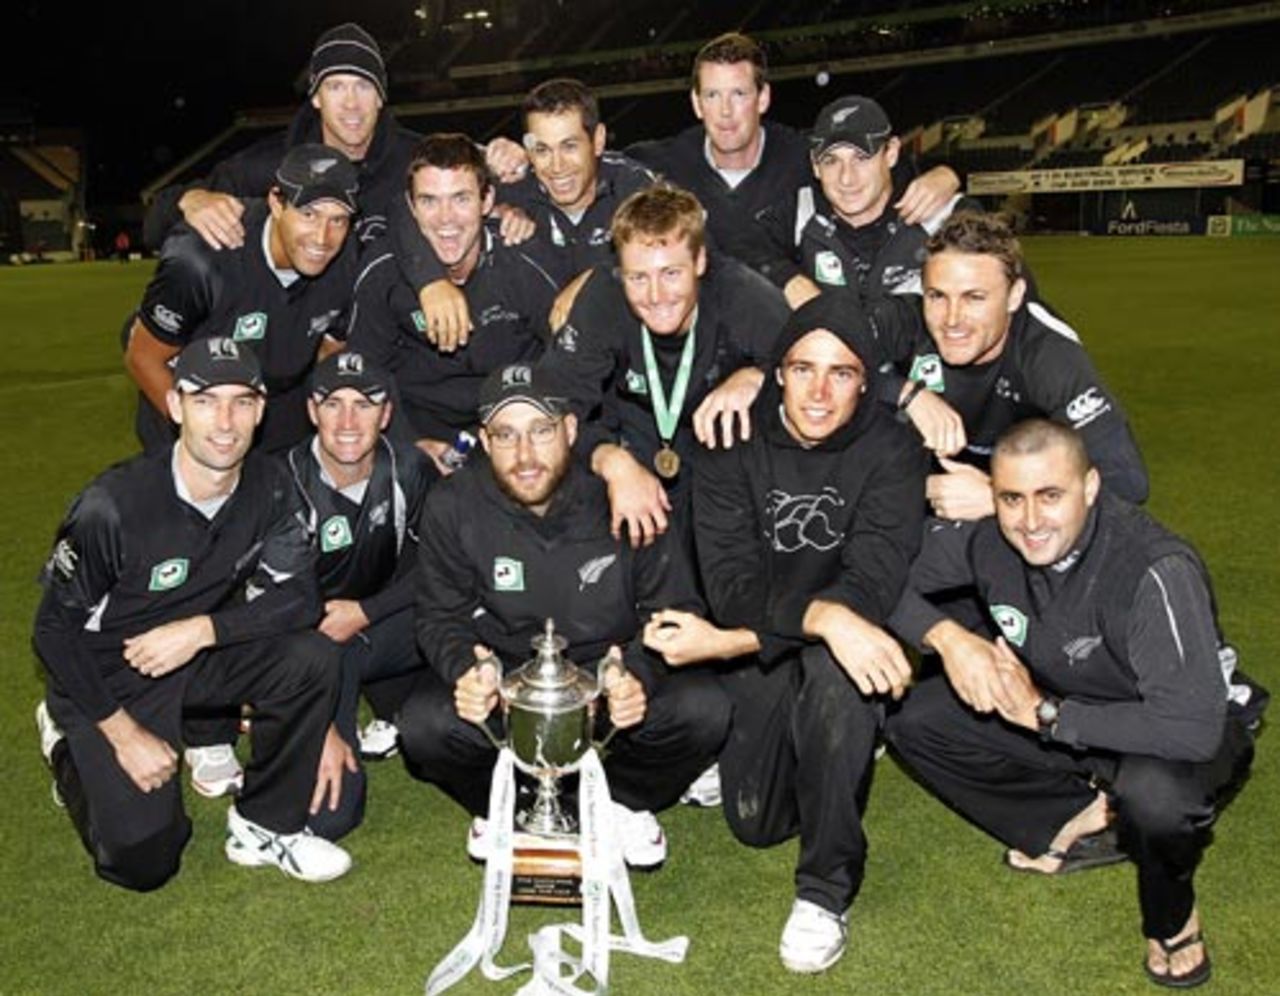 New Zealand maintained their record of never losing to Bangladesh at home, New Zealand v Bangladesh, 3rd ODI, Christchurch, February 11, 2010